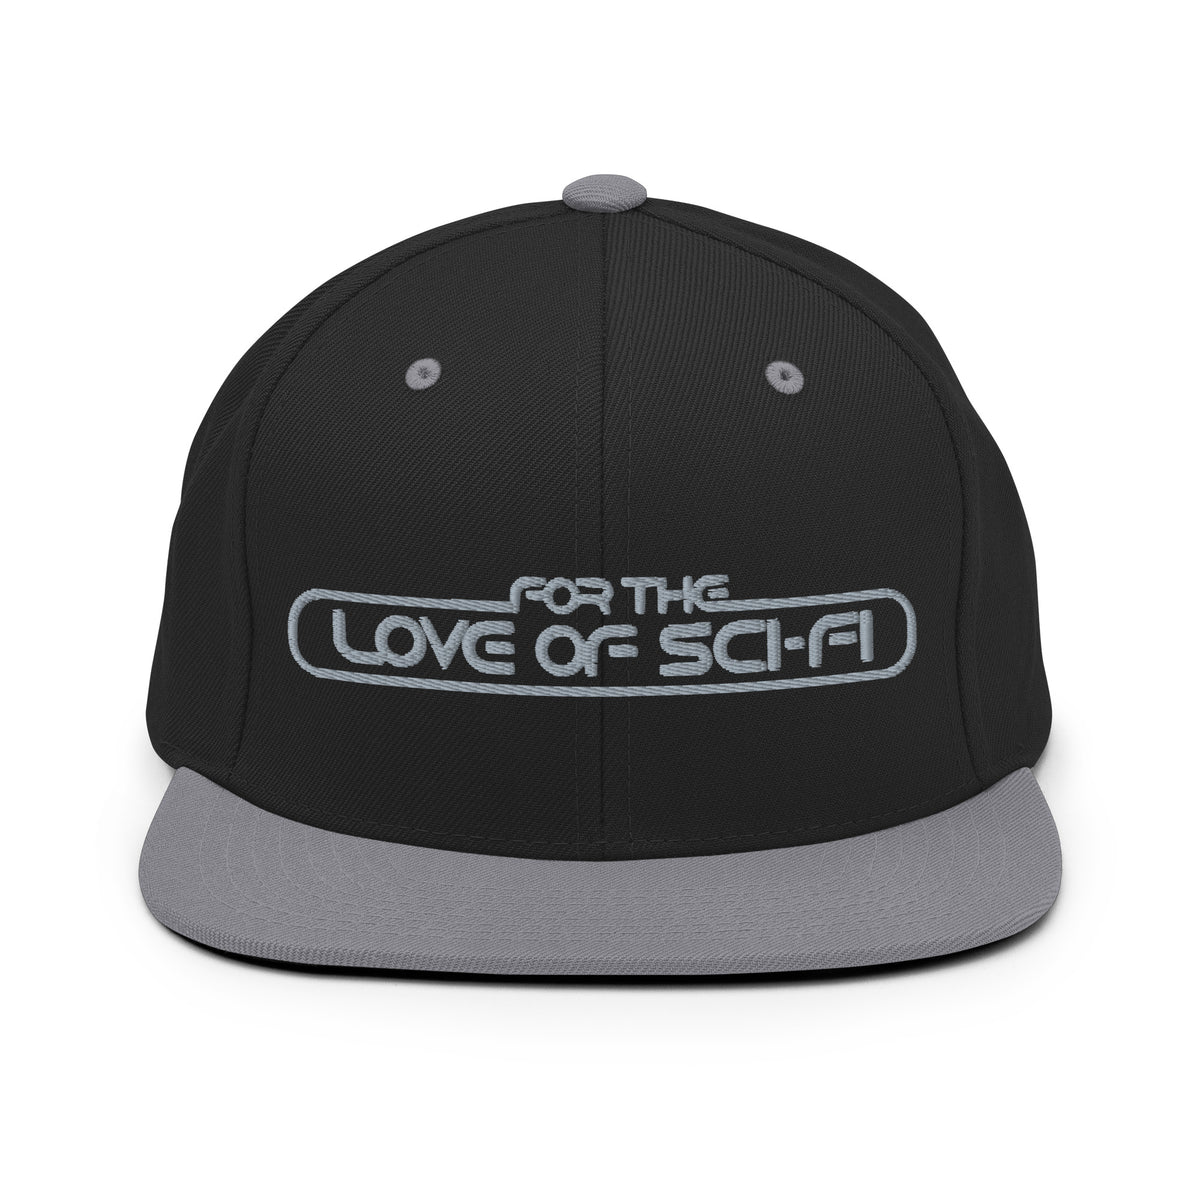 For The Love Of Sci-Fi Snapback Hat